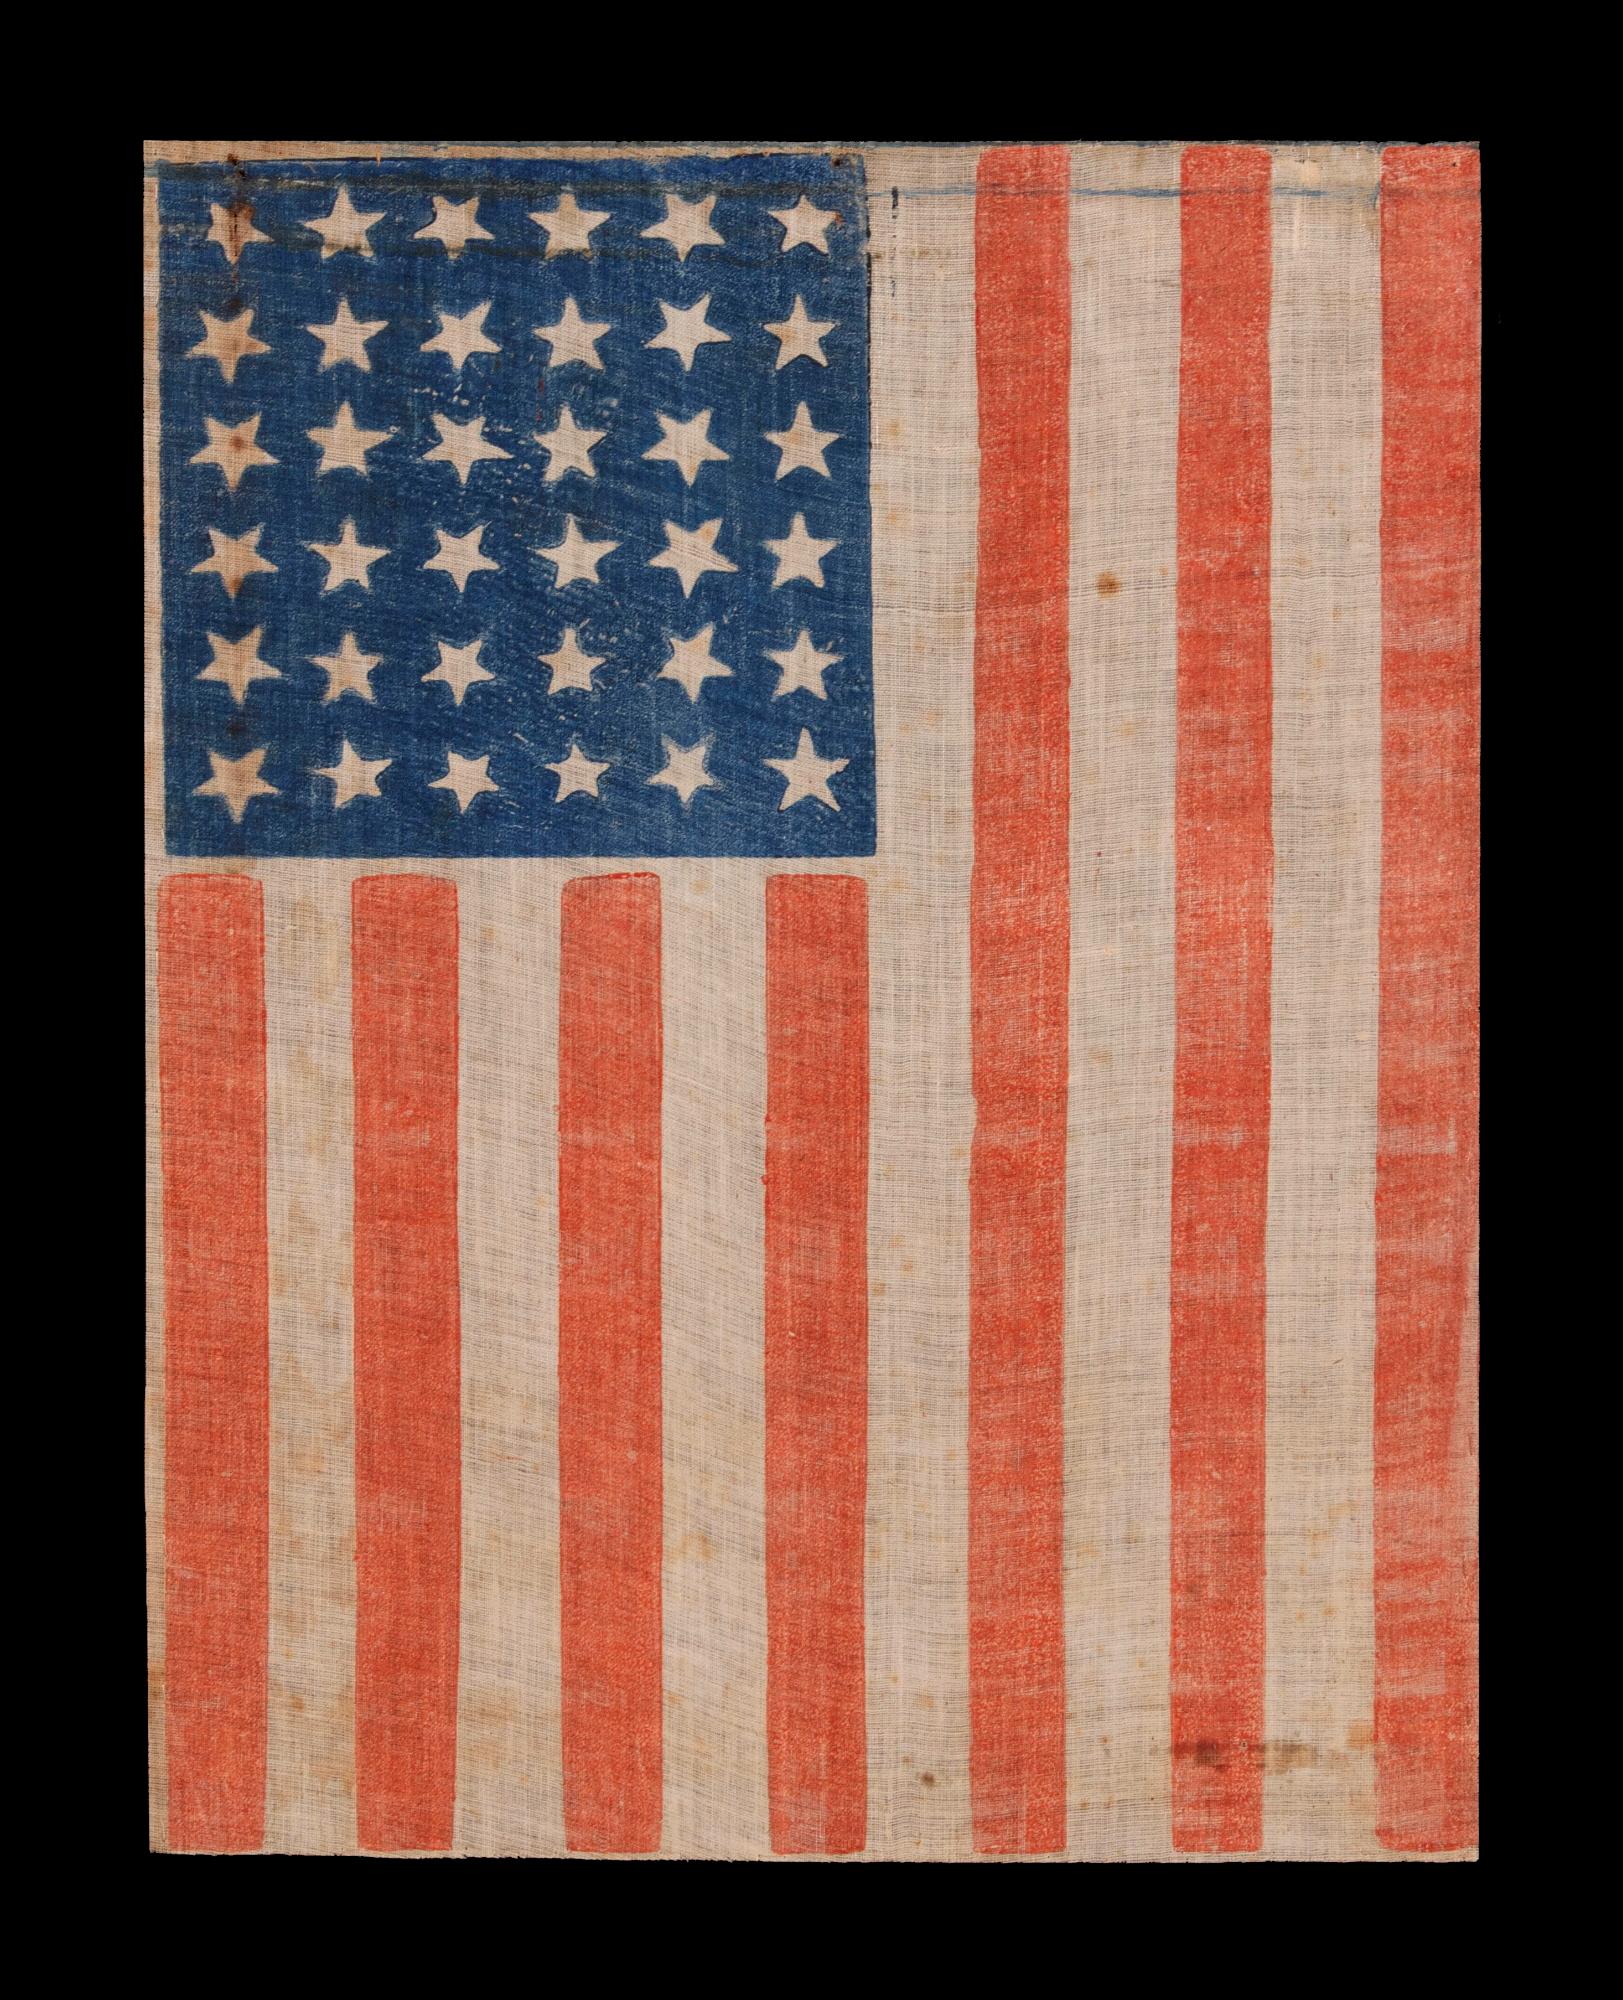 36 Star Antique Parade Flag, Vertical Position, Nevada Statehood, ca 1861-1867 In Good Condition For Sale In York County, PA